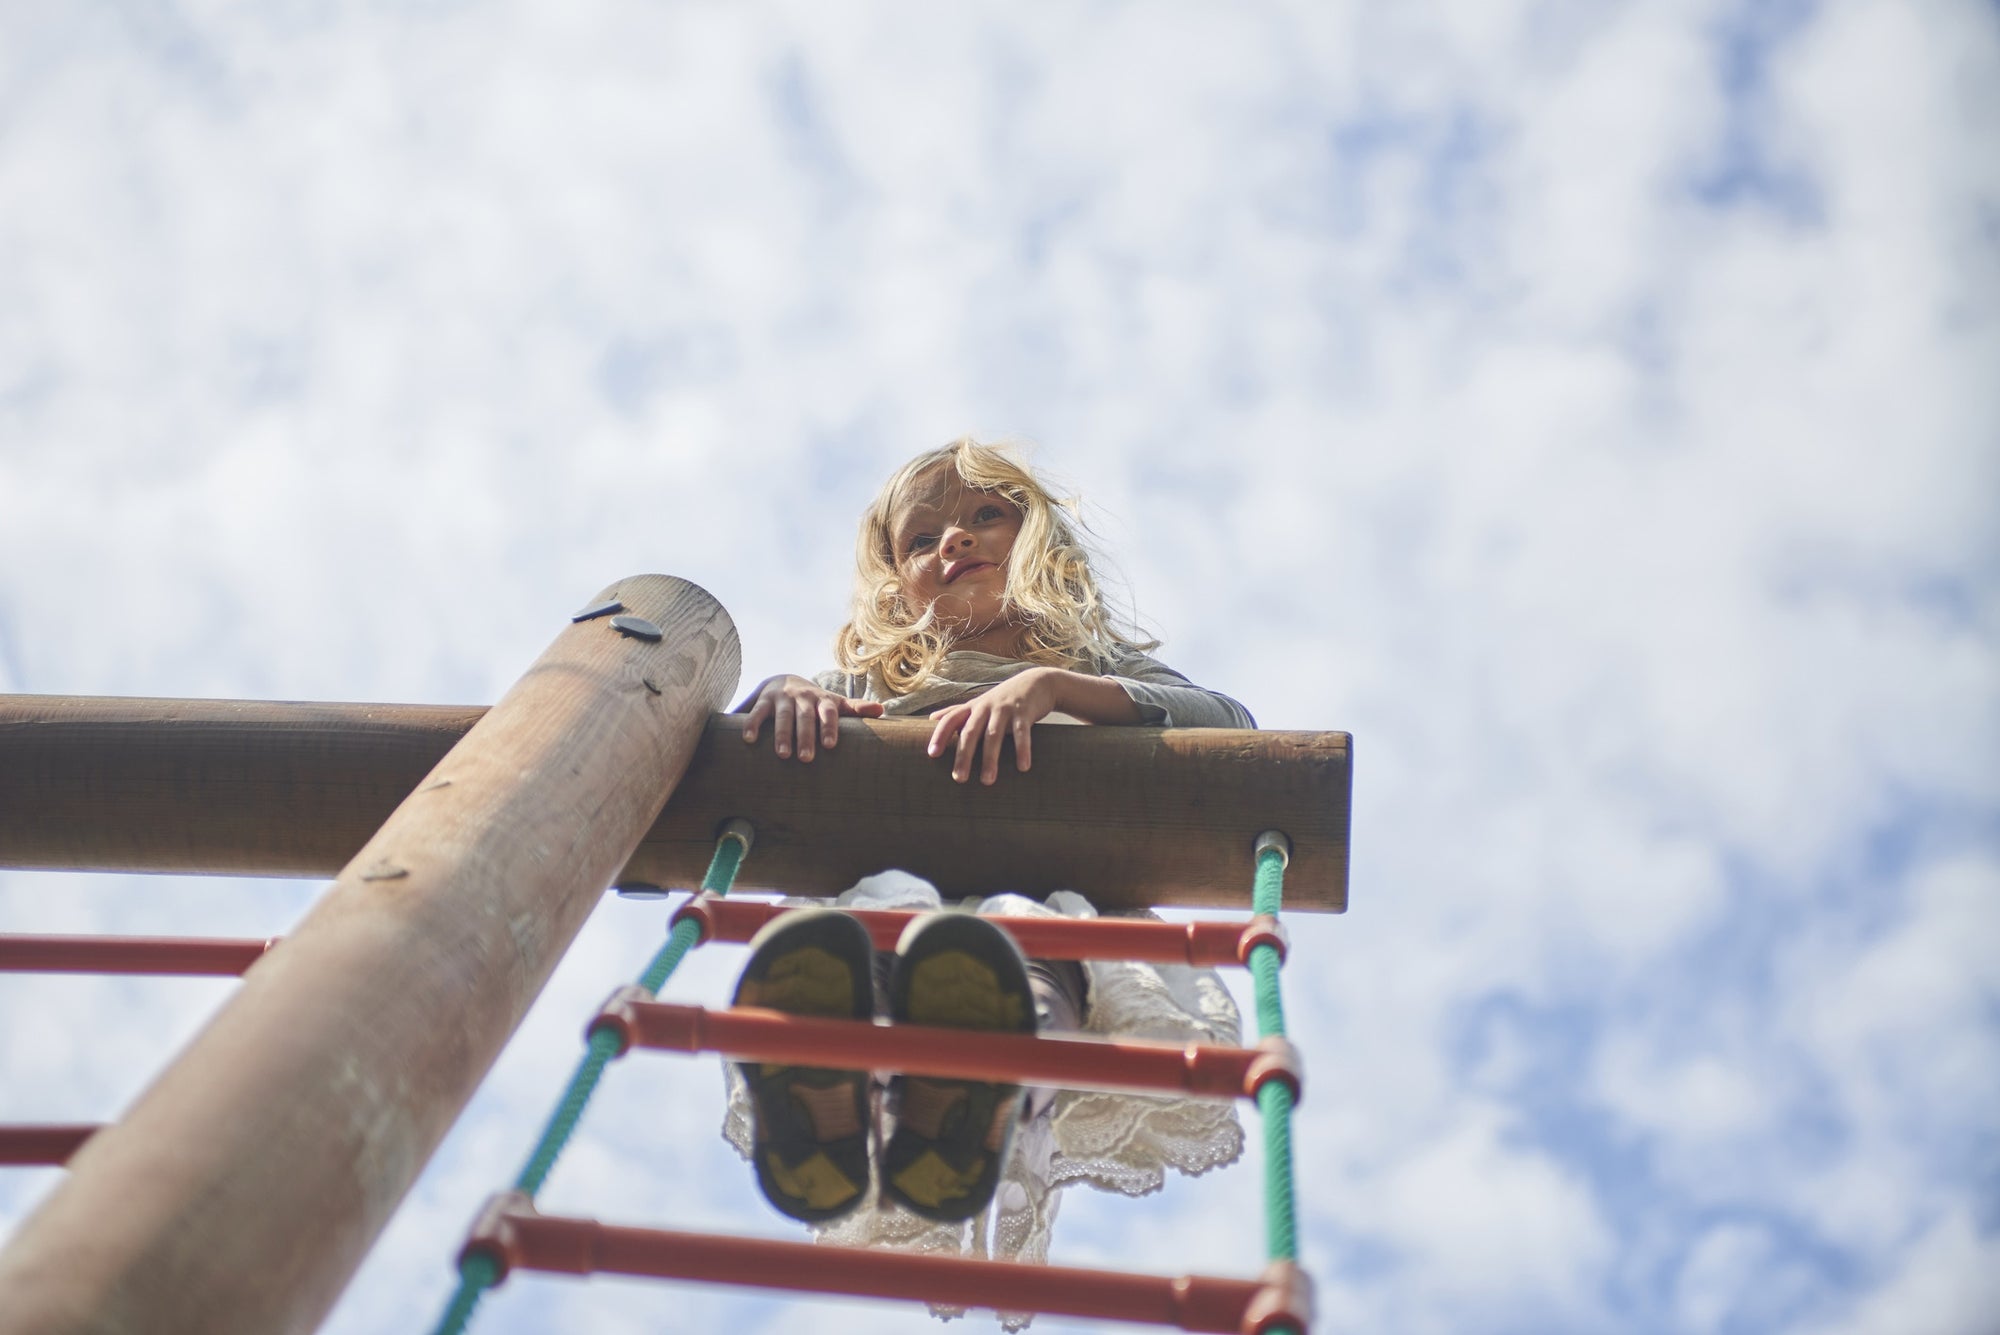 Young girl standing at top of ladder in playground